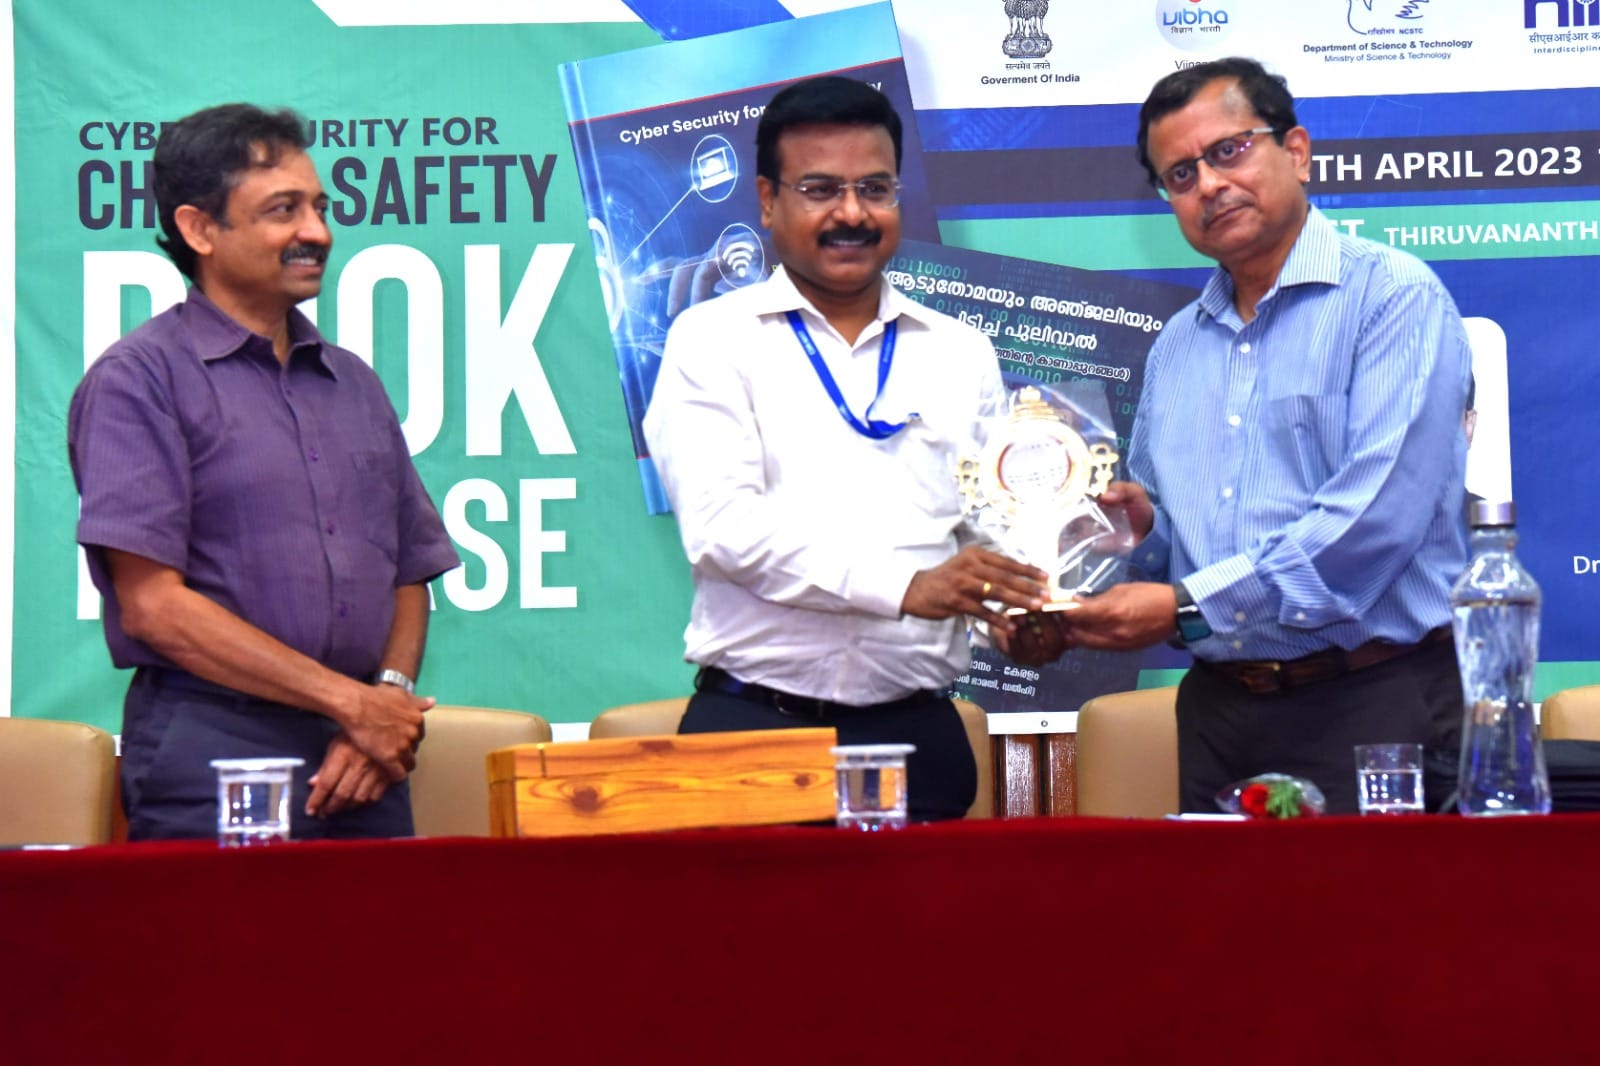 Dr. C. Anandharamakrishnan, Director inaugurated the program on ‘Cyber Security for Child’s Safety’organised by  Swadeshi Science Movement Kerala under support from NCSTC